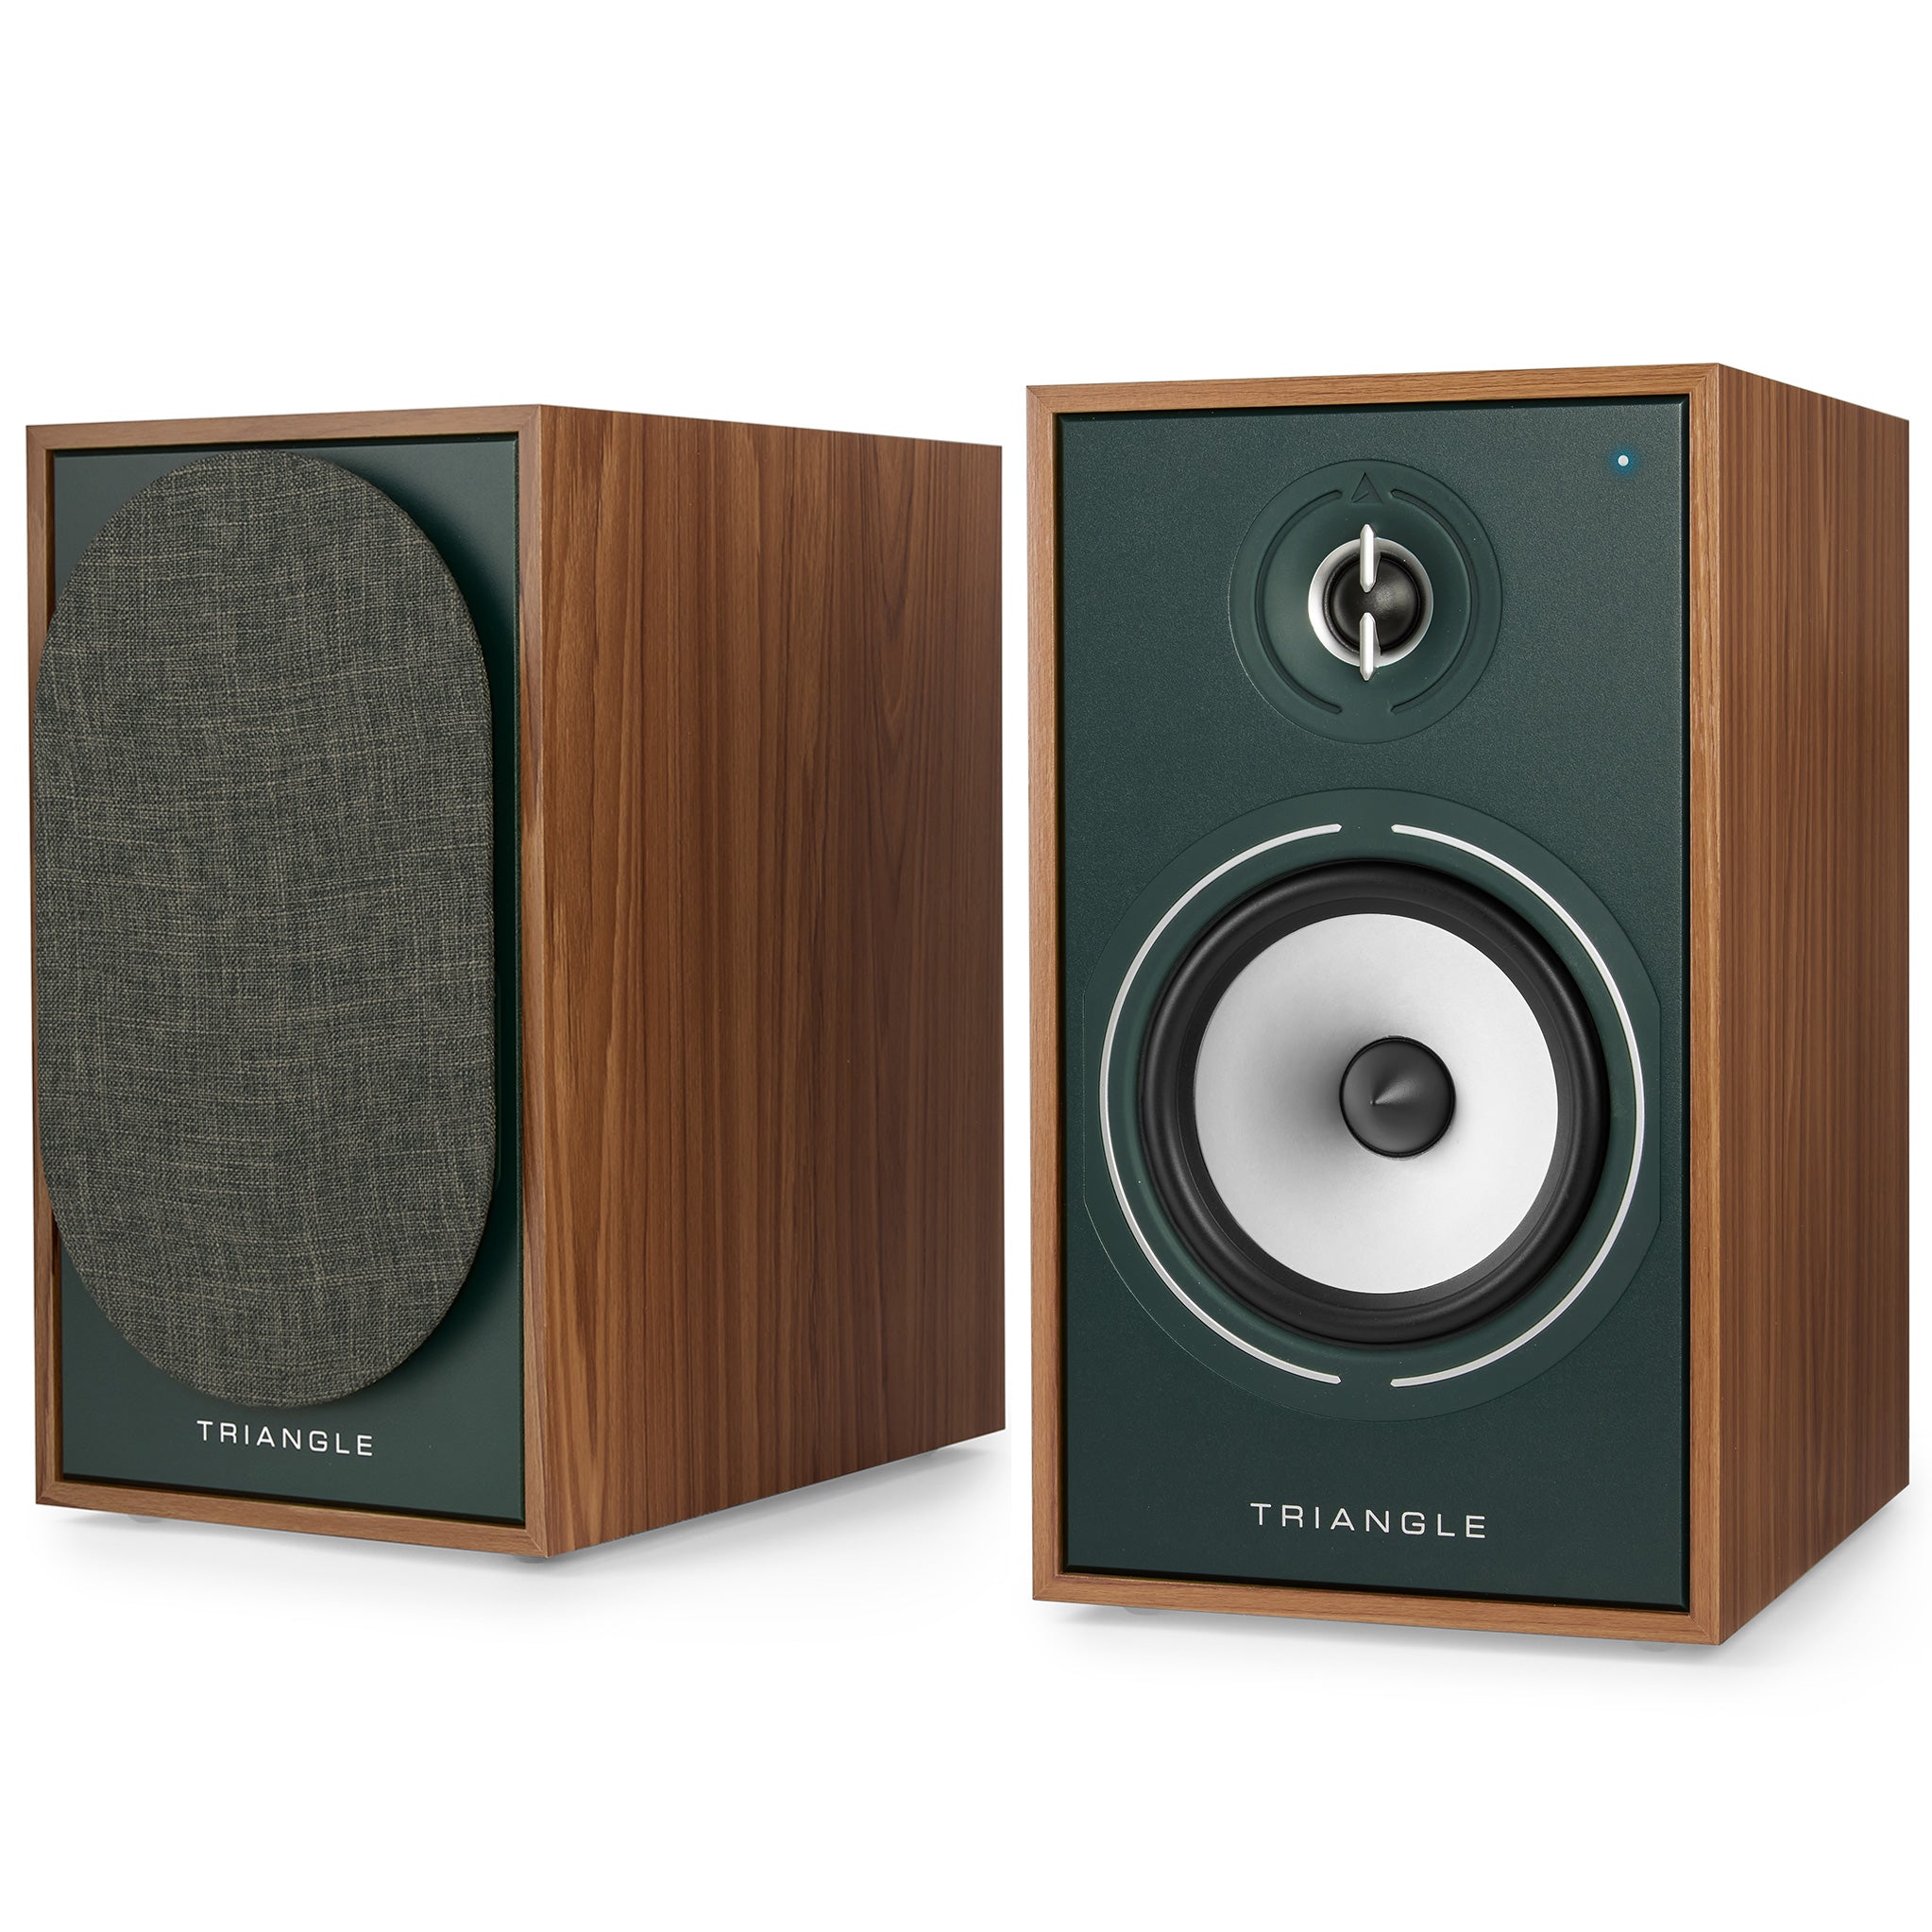 triangle-enceinte-bibliotheque-active-bluetooth-br03-connect-Borea-Connect-vert-green-picture-packshot-1